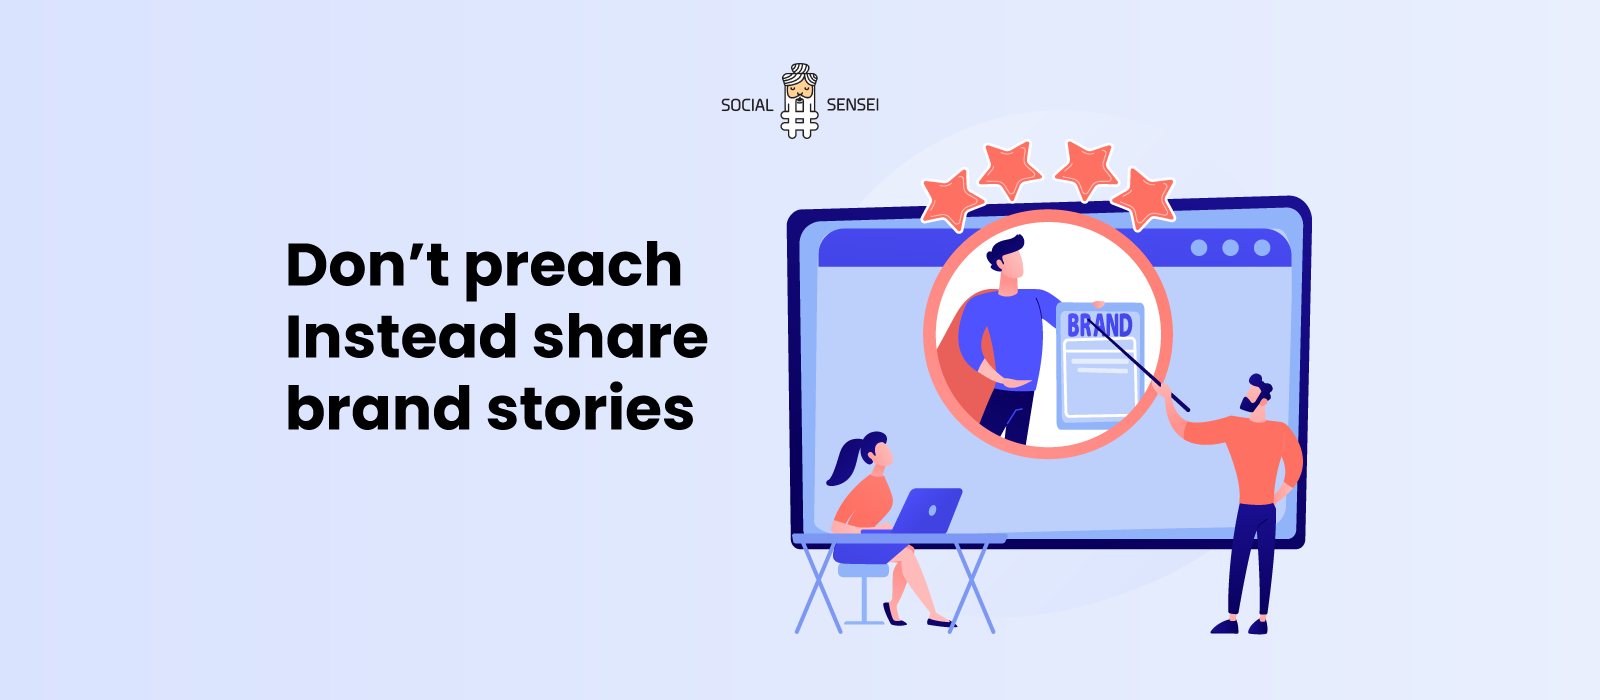  Don’t preach Instead share brand stories